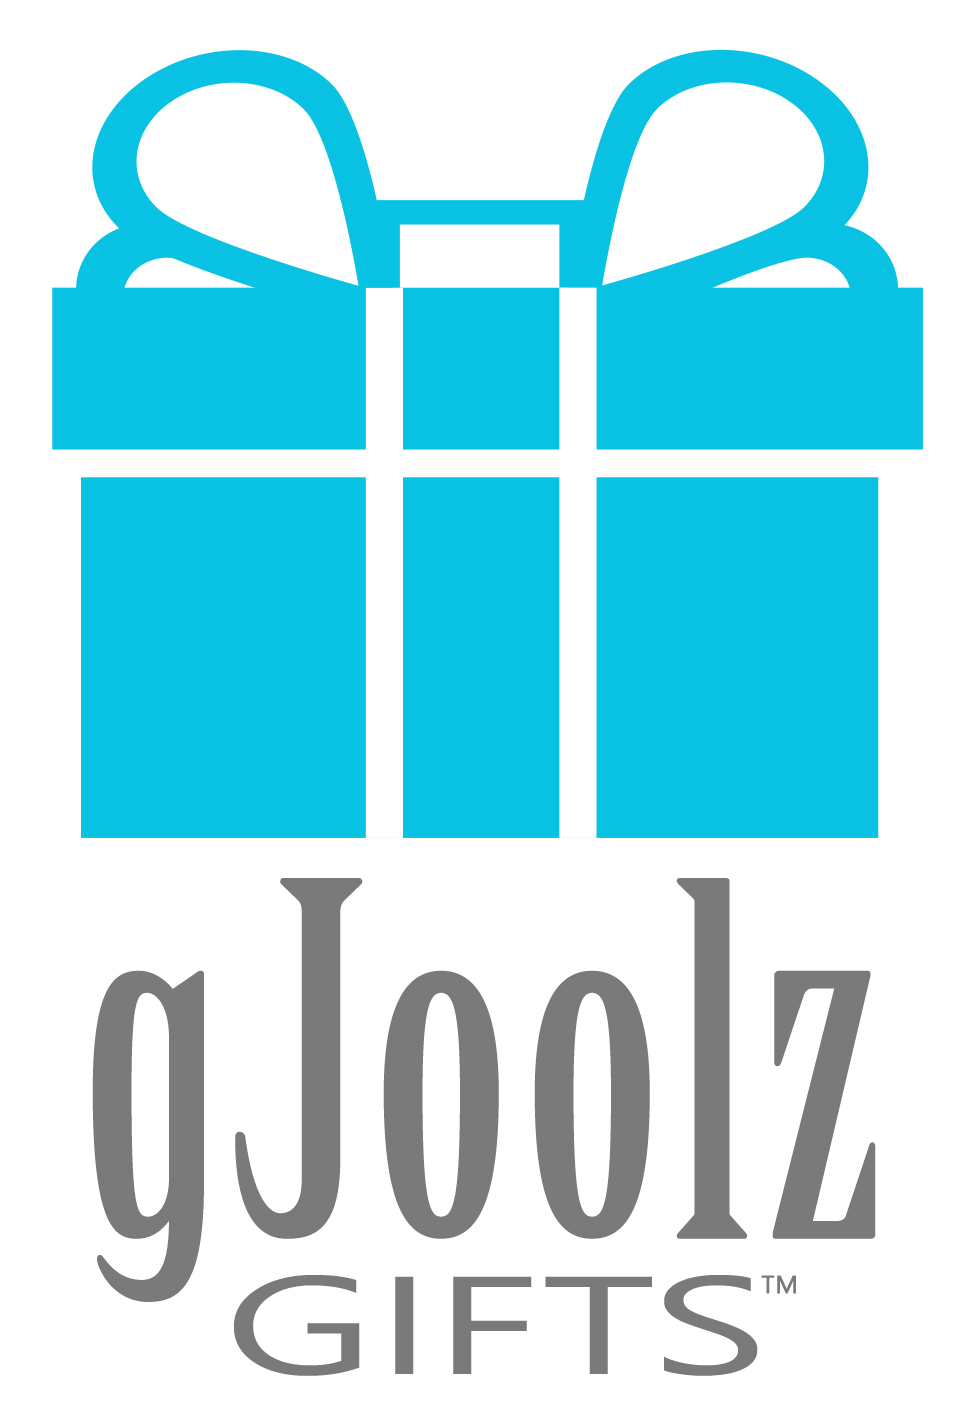 gjoolz-gifts-on-white-cropped.jpg